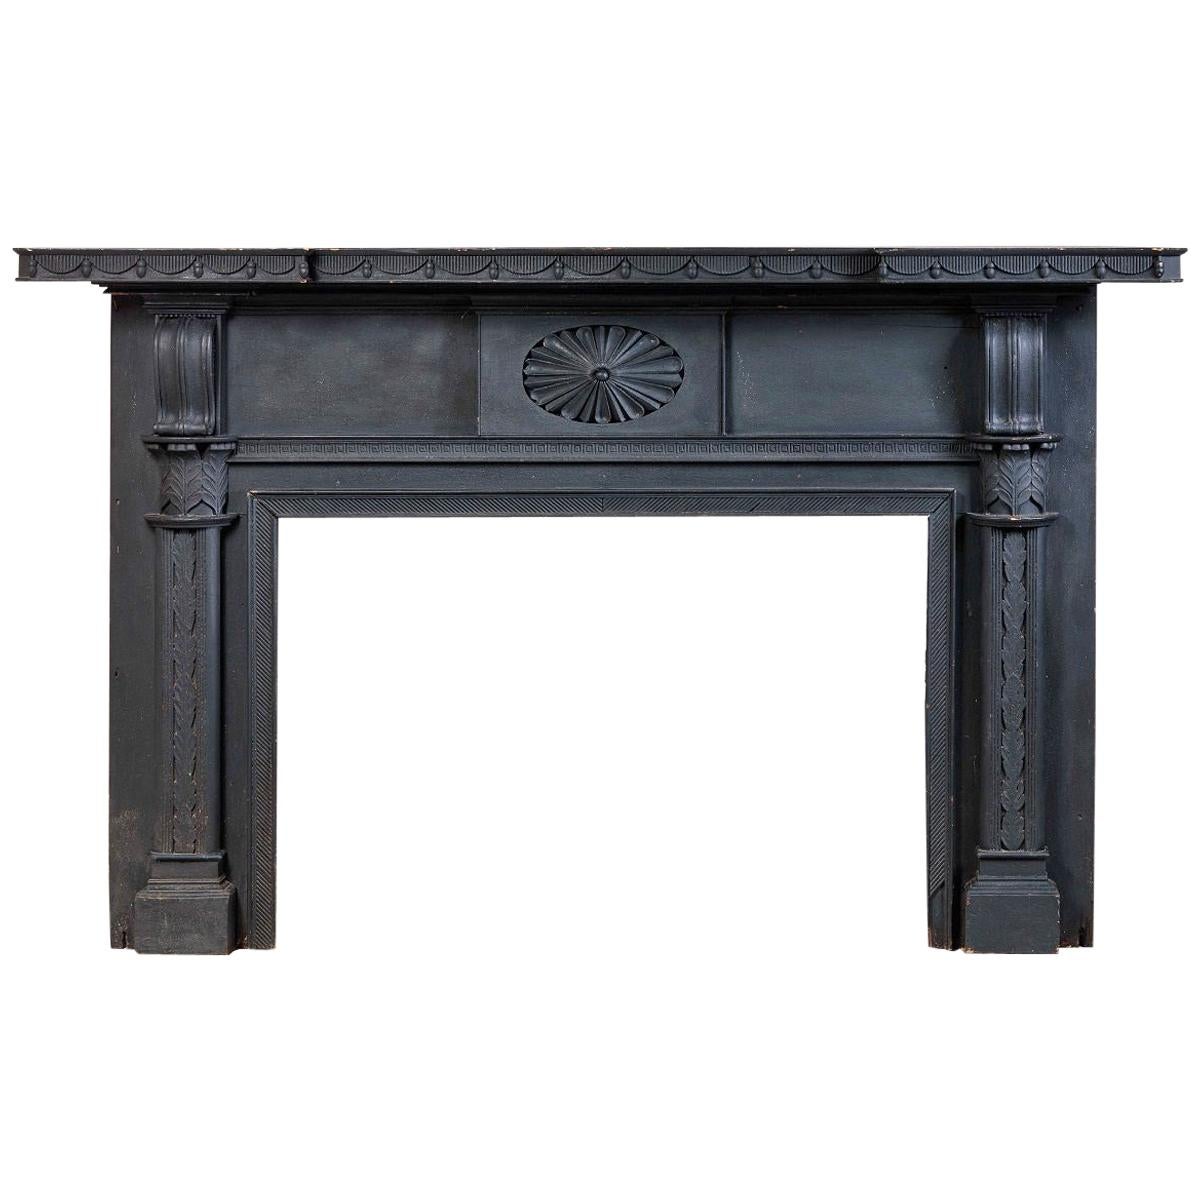 Carved Federal Mantelpiece For Sale